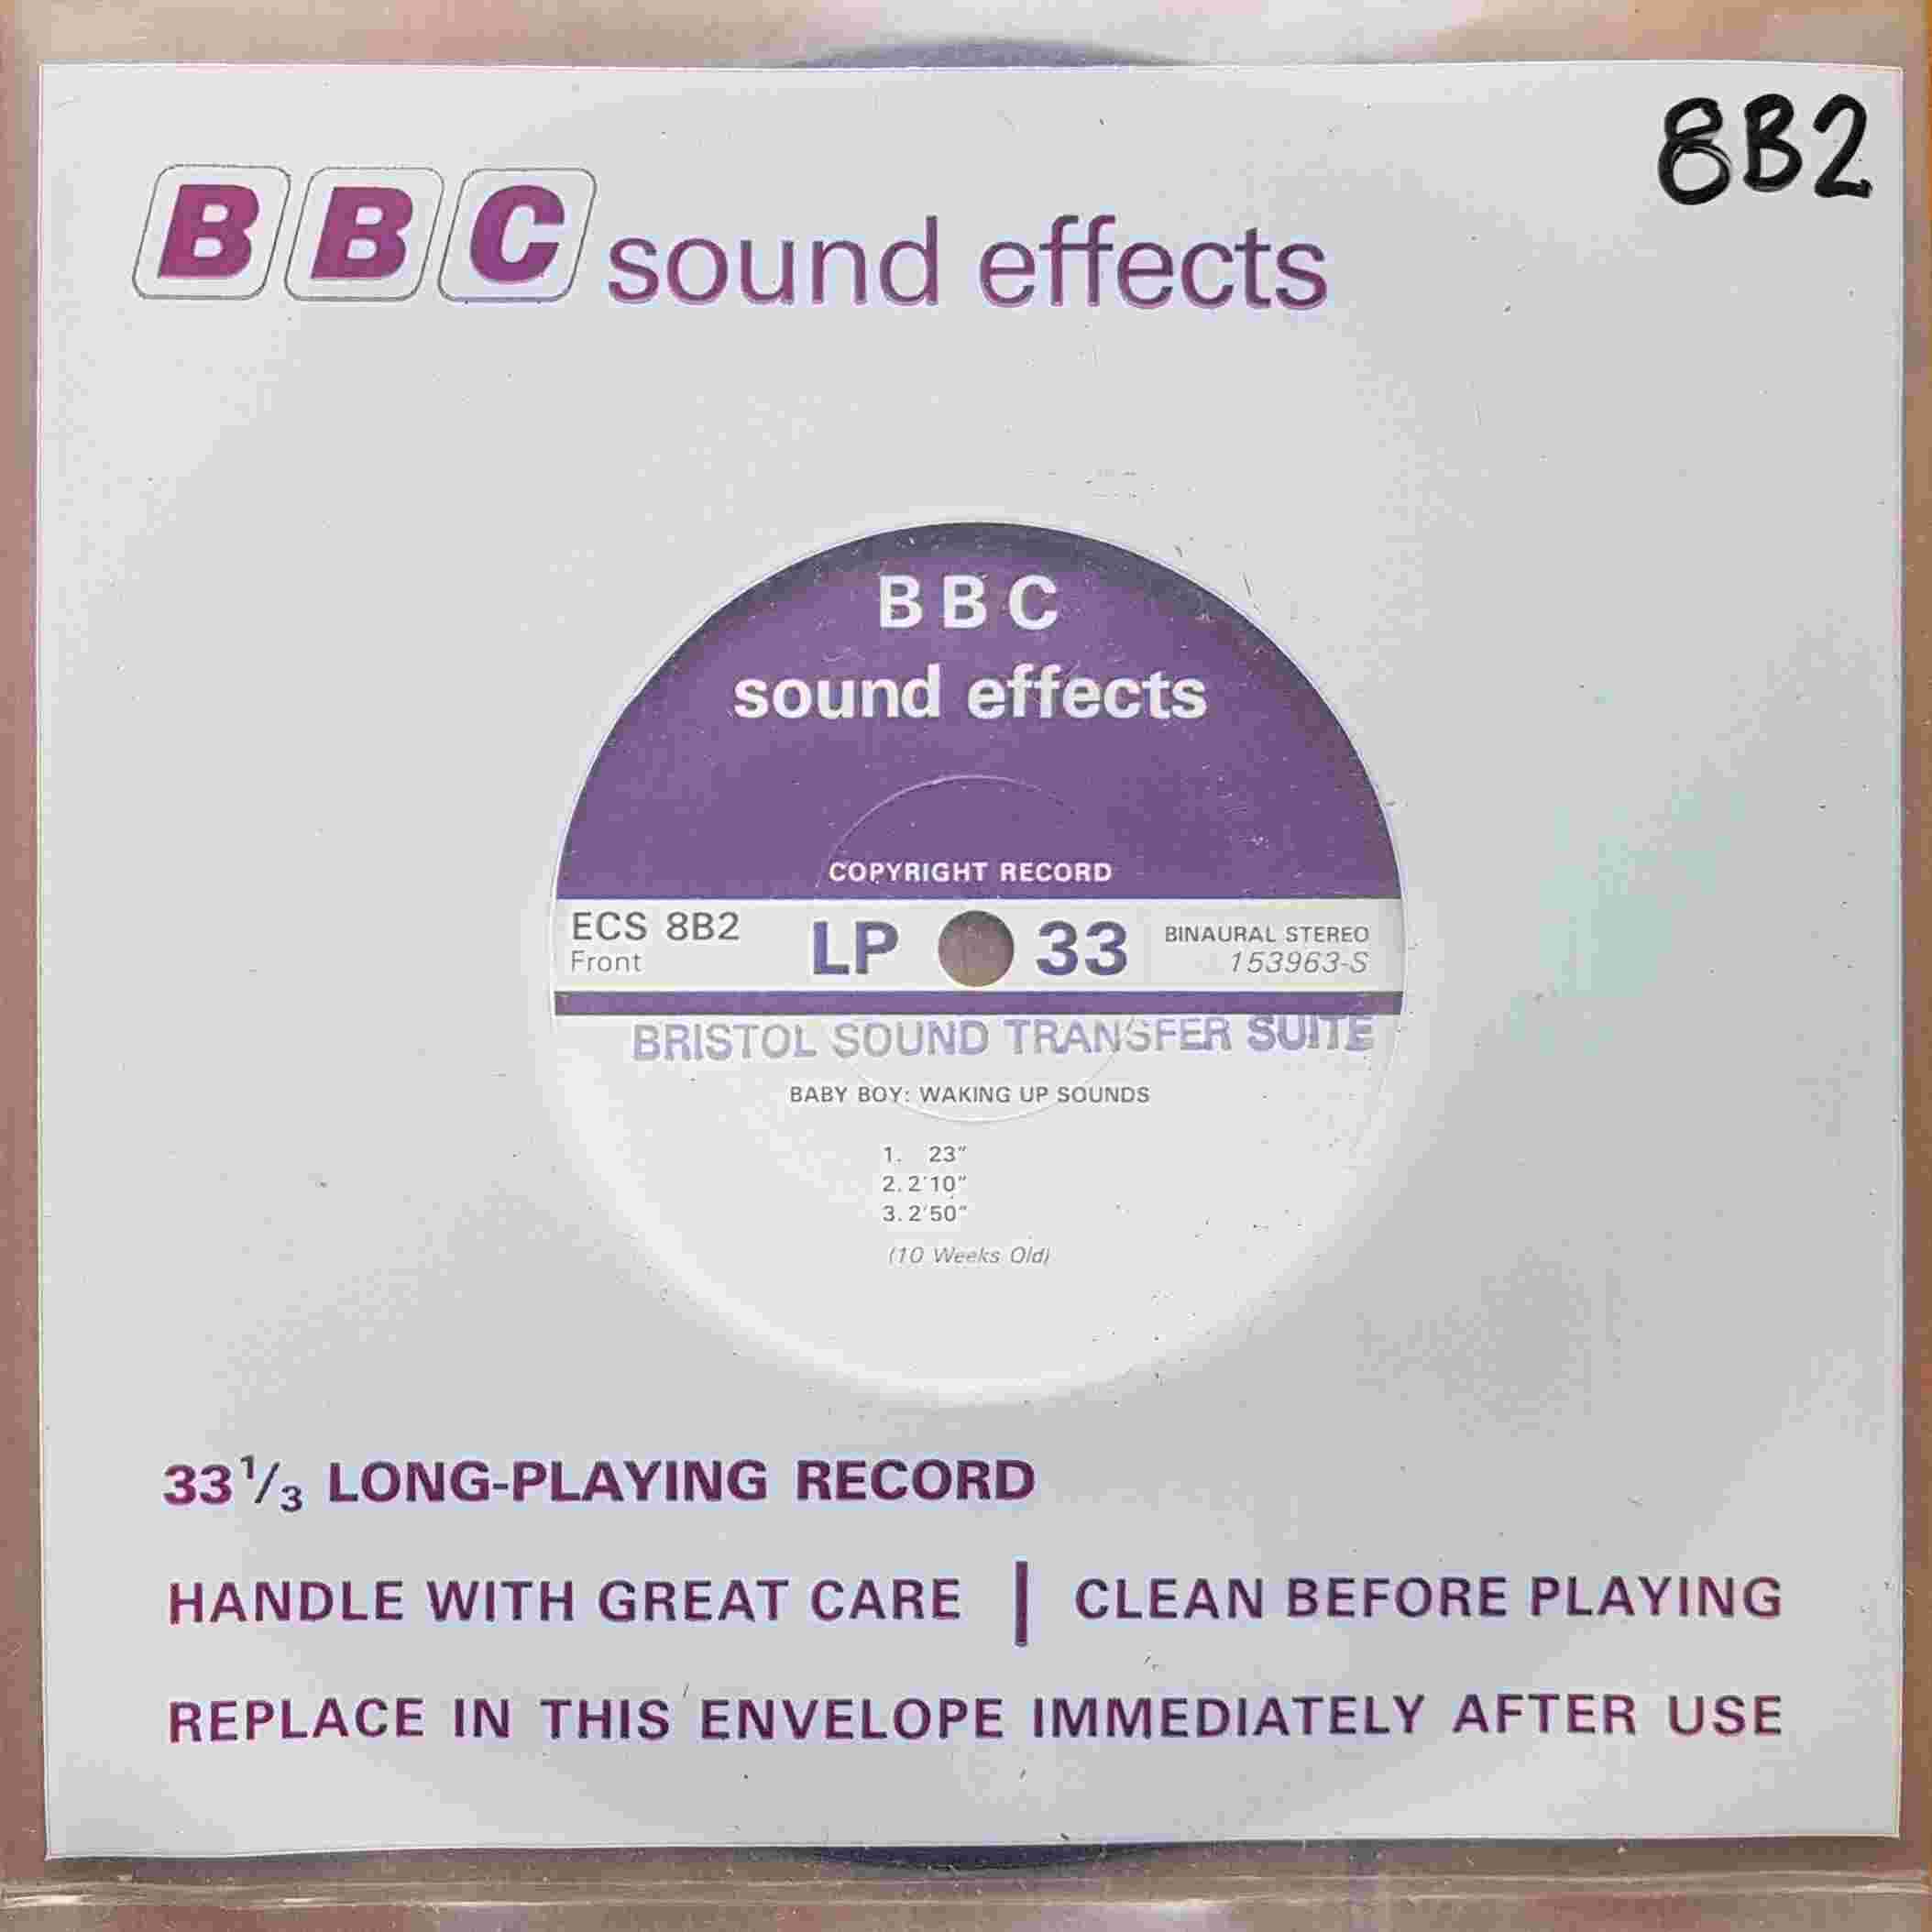 Picture of ECS 8B2 Baby boy: Waking up sounds by artist Not registered from the BBC singles - Records and Tapes library